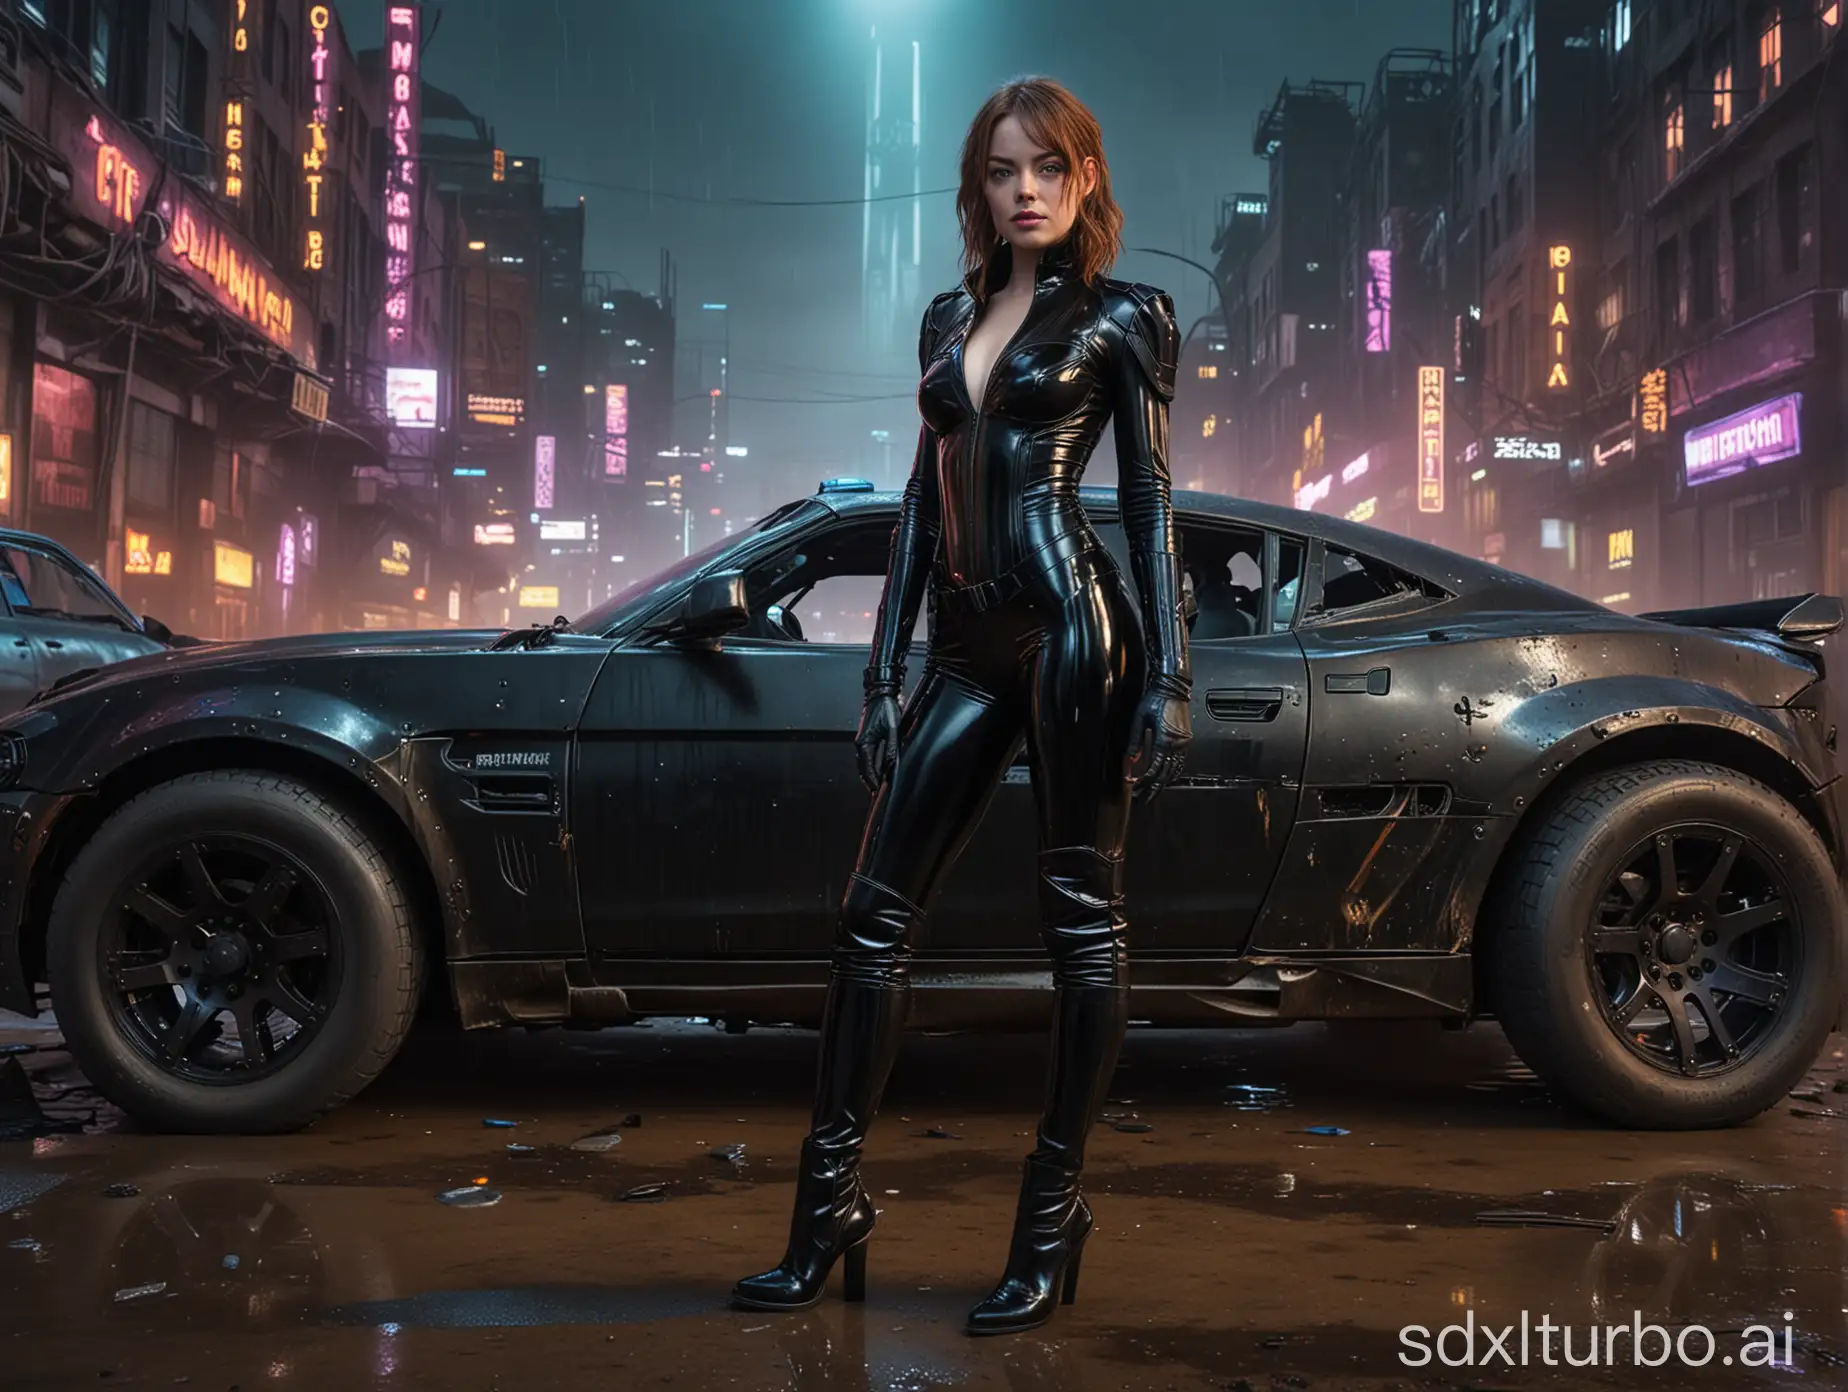 realistic hd photo , cyberpunk police Emma Stone standing , wearing black low-cut shinny pvc catsuit , wearing long shiny pvc gloves , wearing shinny pvc thigh high boots , in destroyed cyberpunk city with mad max car , inlighted by neons